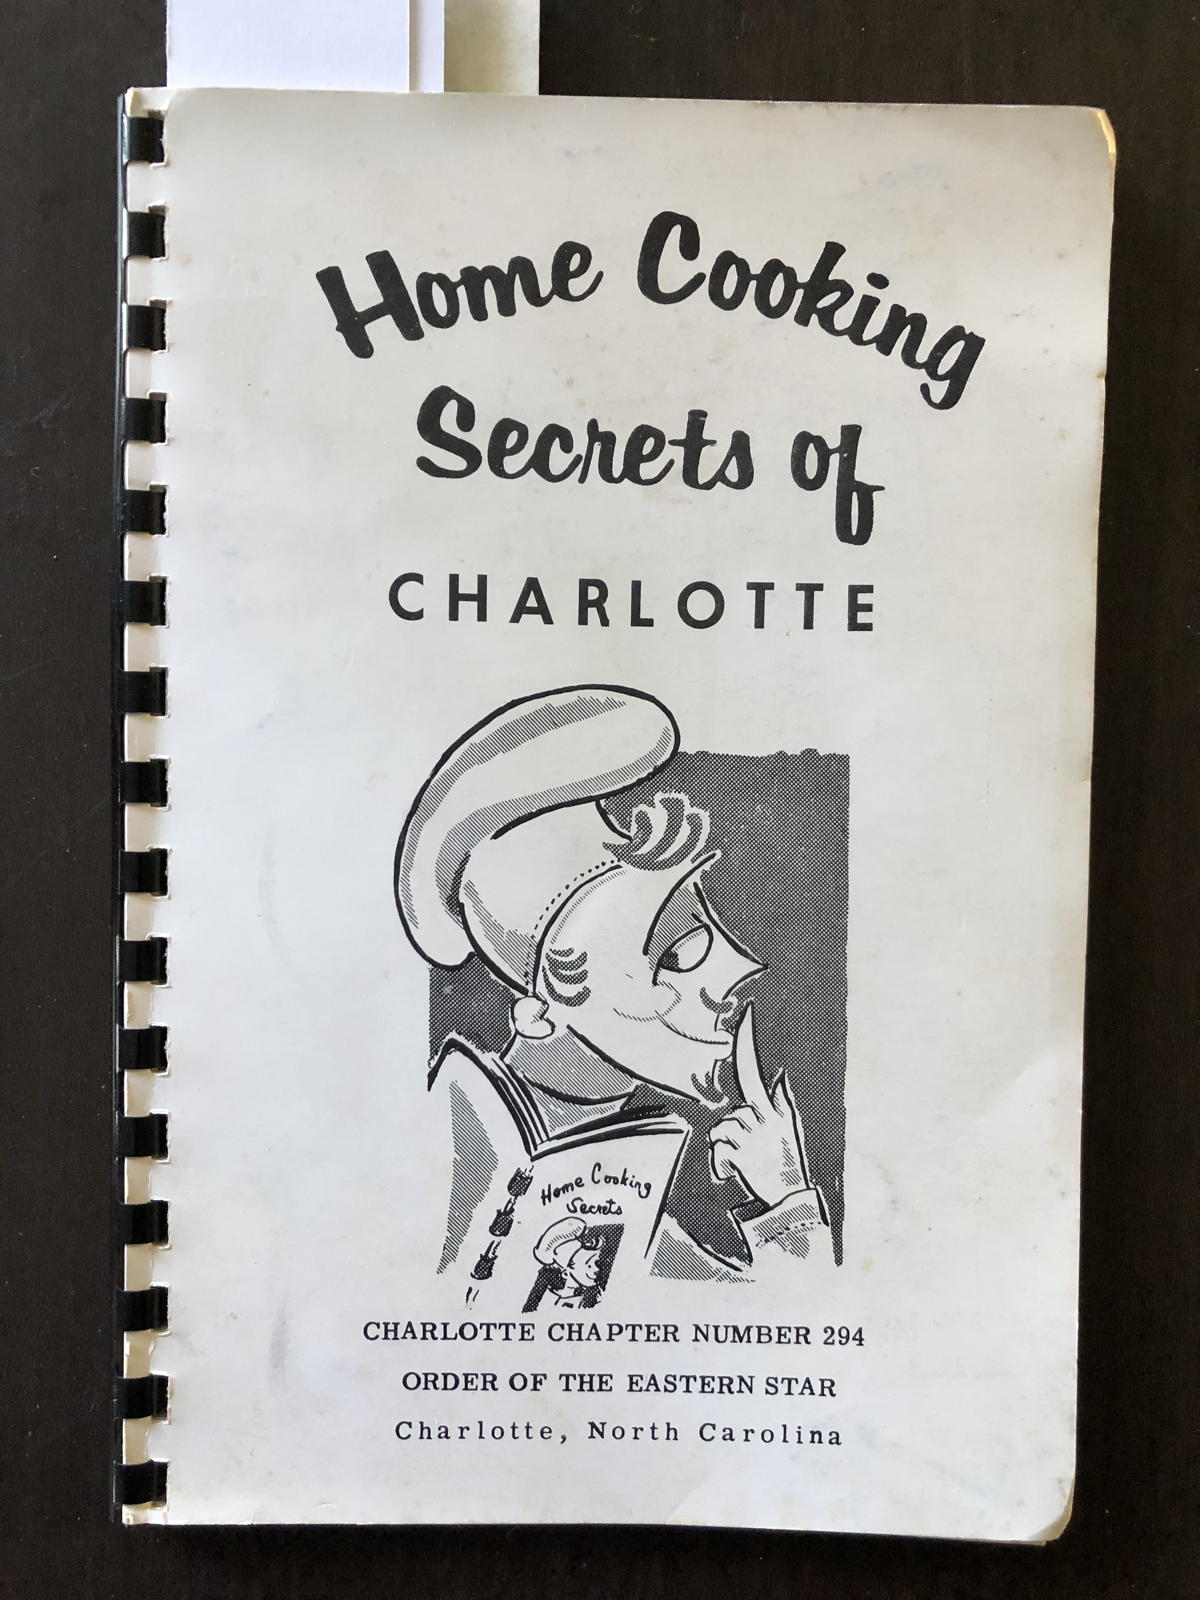 Home Cooking Secrets of Charlotte